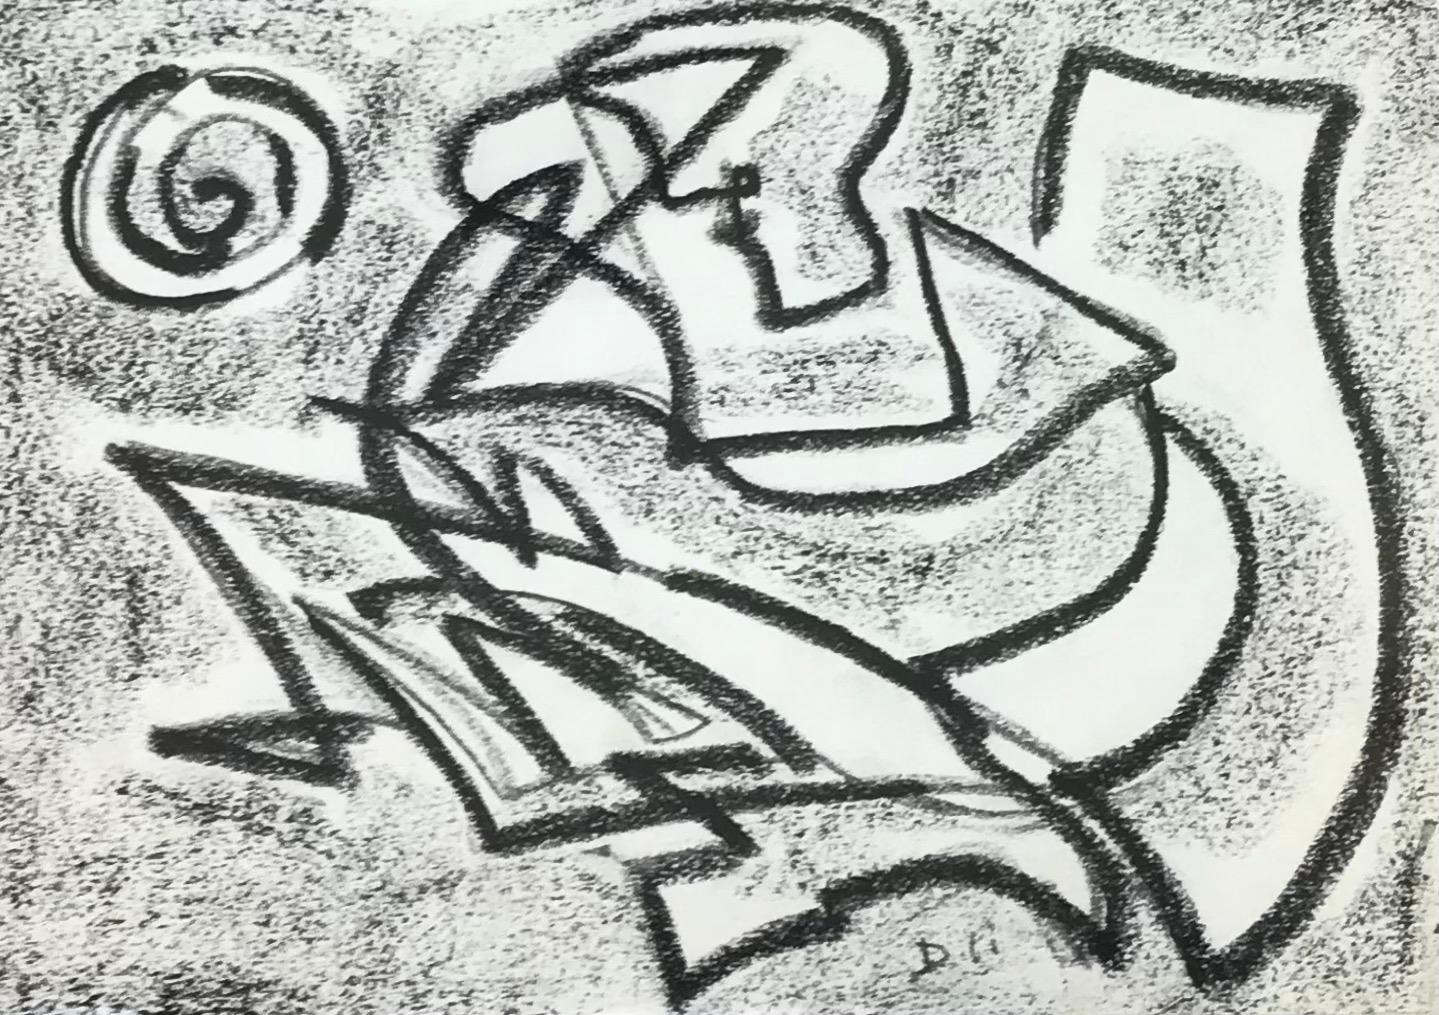 Abstract composition by Julien Dinou - Charcoal on paper A4 size 